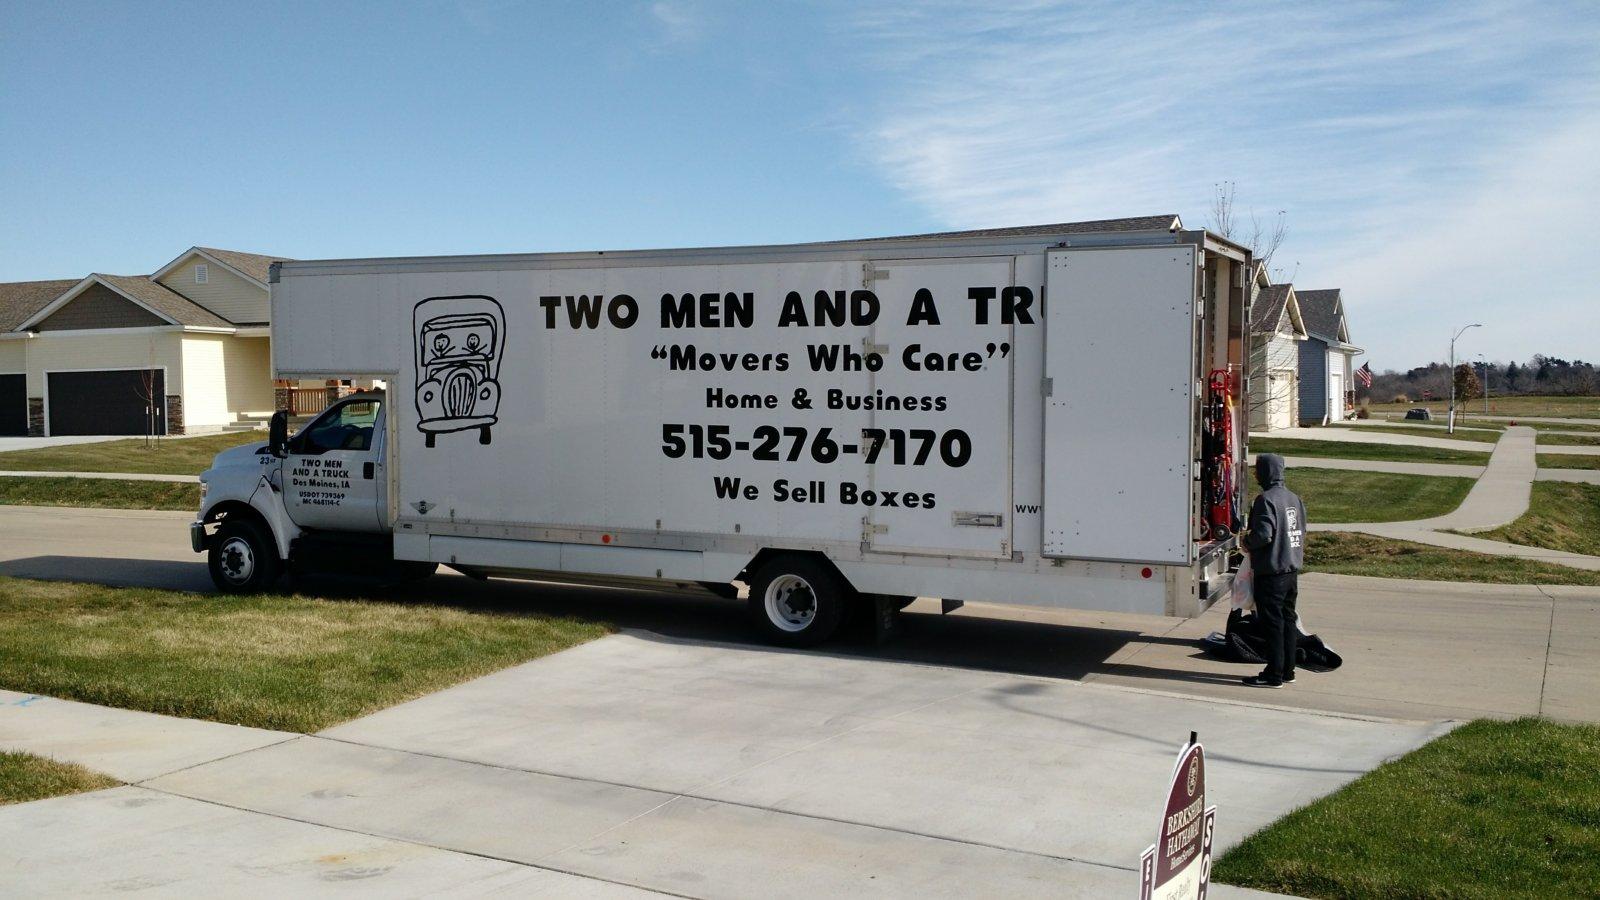 Ten out of ten would use strapping young movers again.